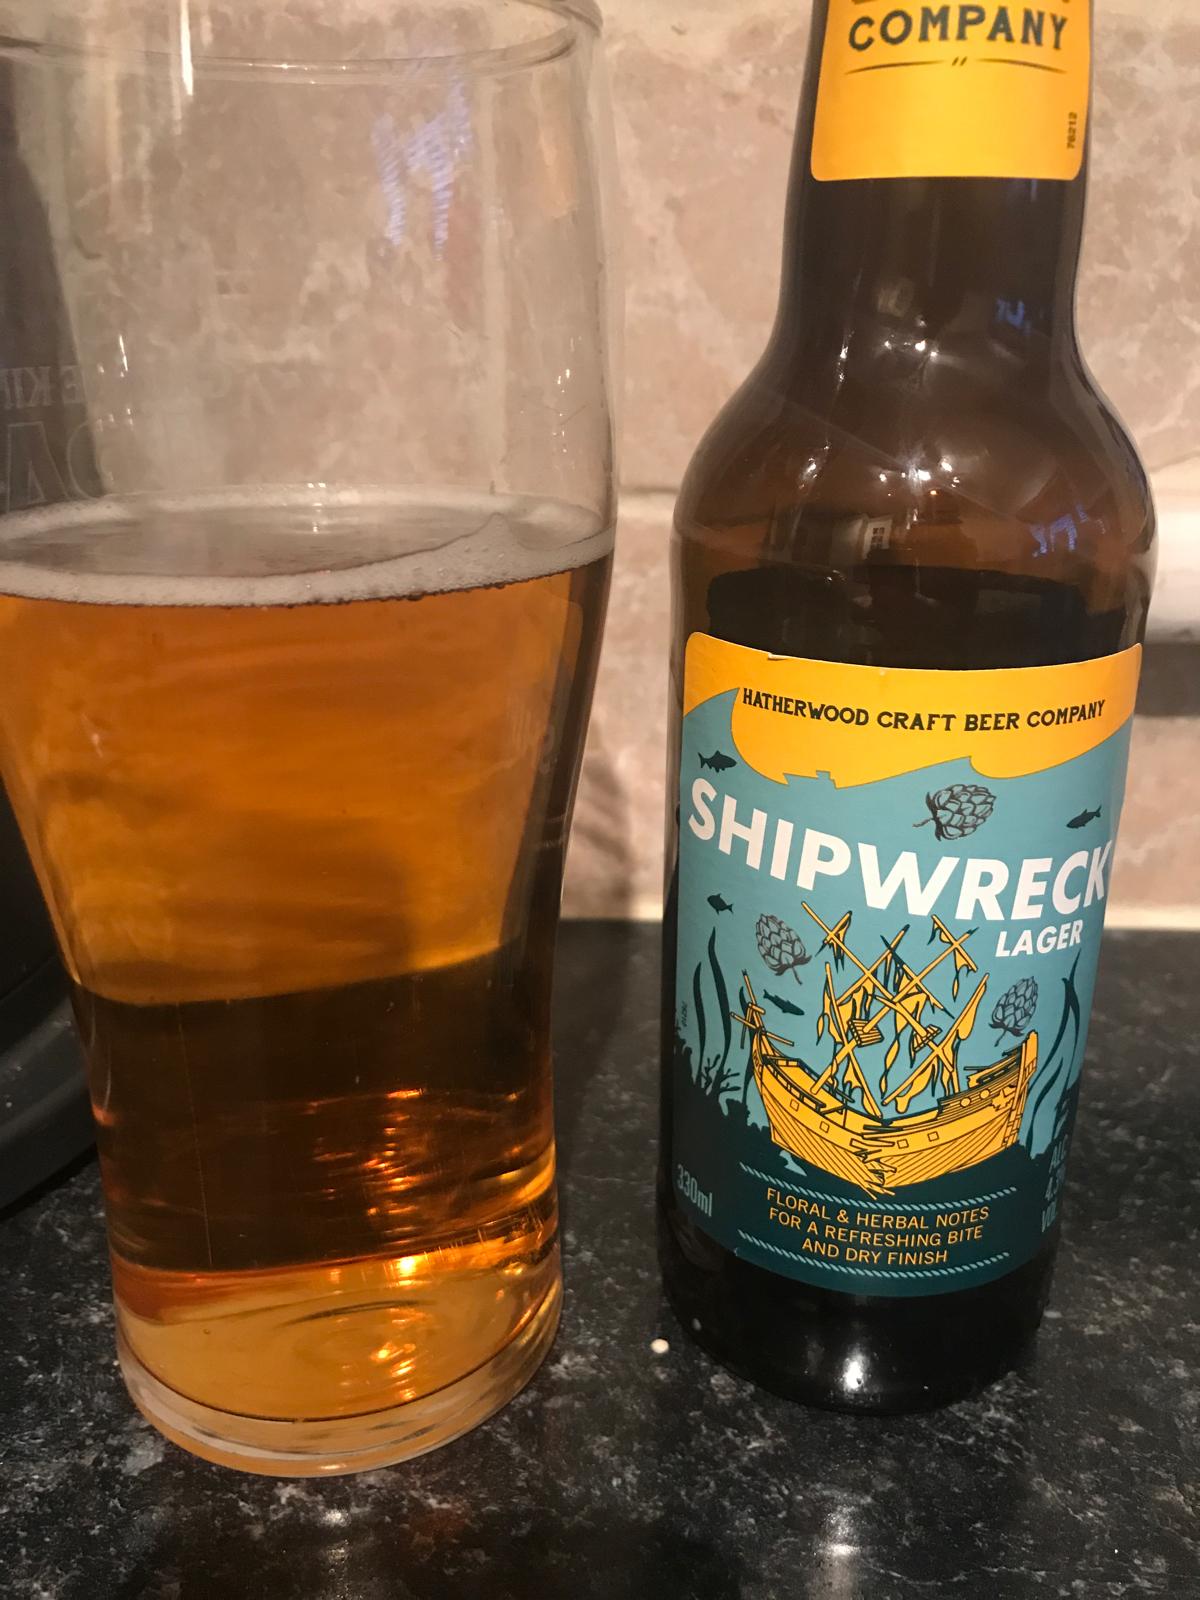 Shipwreck Lager